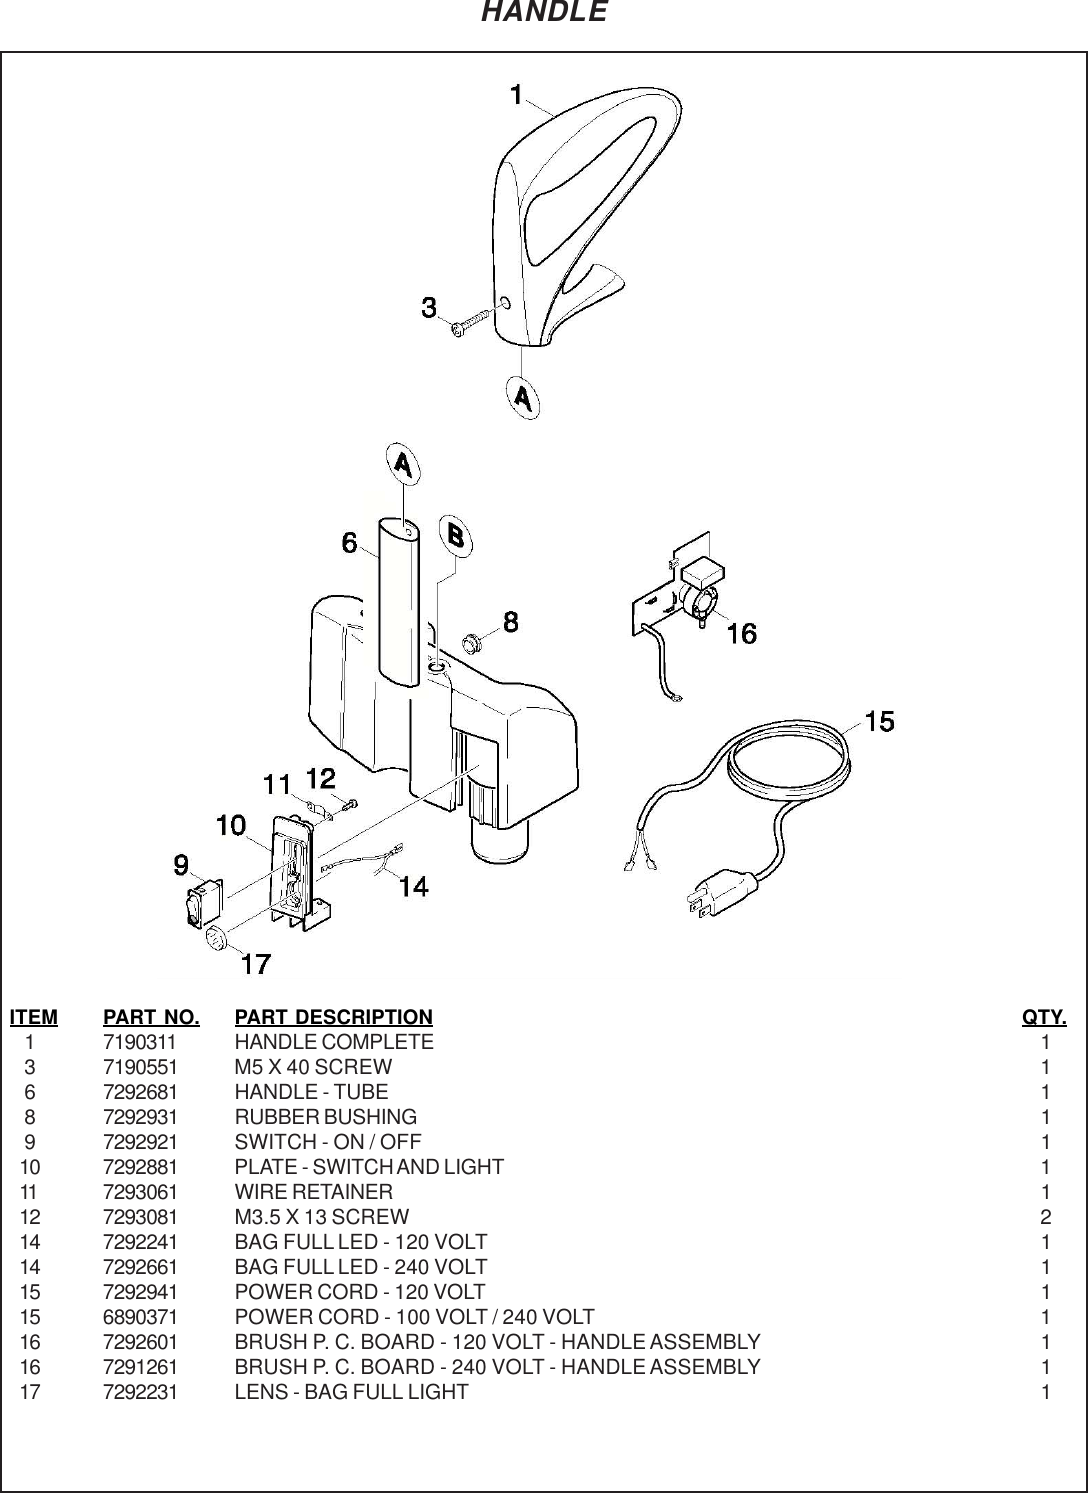 Page 4 of 12 - 9097272 Pacer Dual Motor Illustrated Parts Book.pmd  Nss-pacer-214-ue-218-ue-upright-vacuum-parts-manual